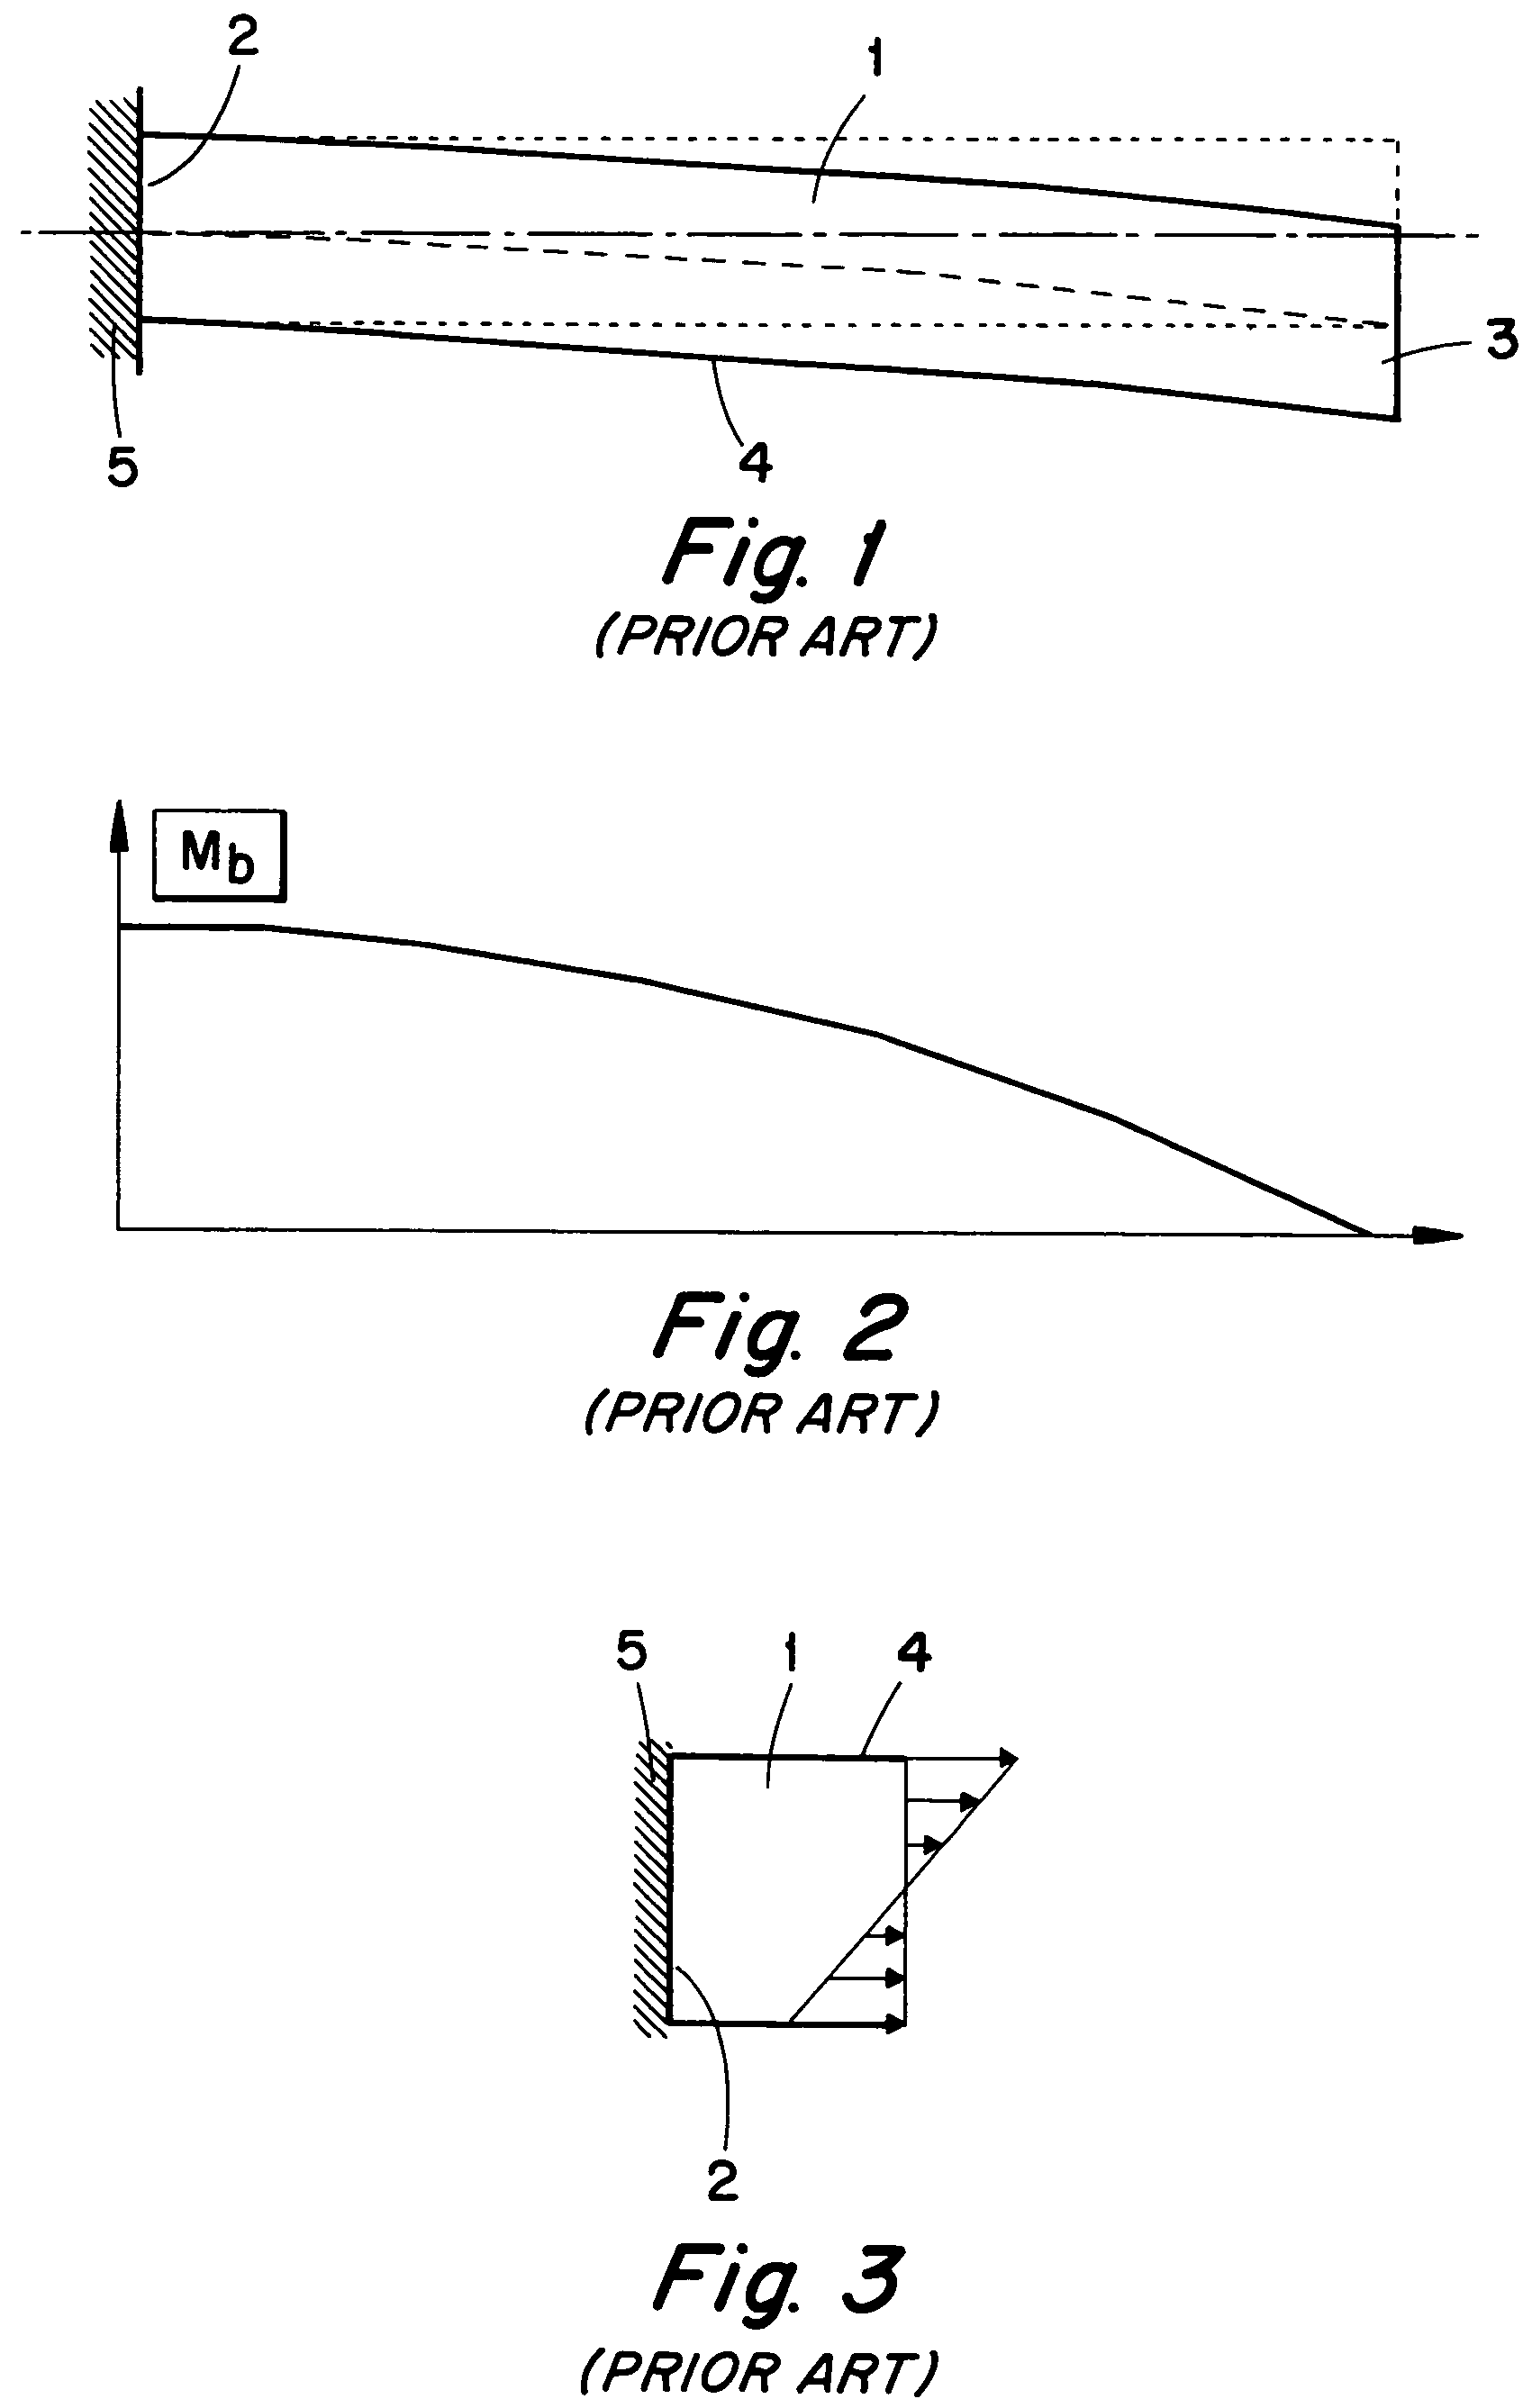 Metal cutting apparatus and method for damping feed-back vibrations generated thereby